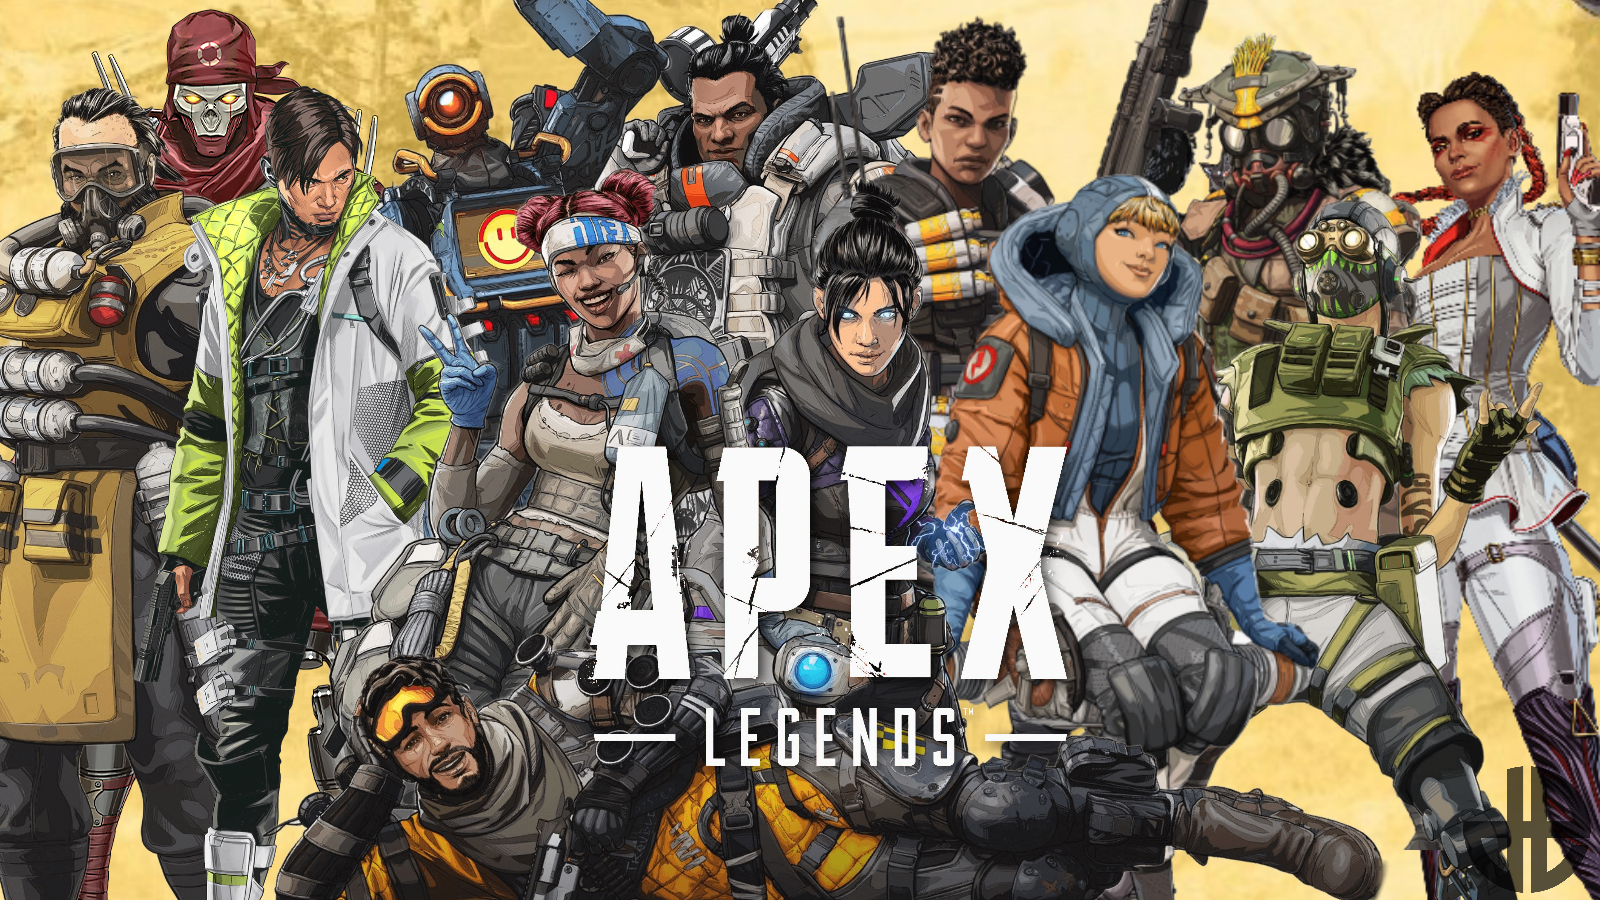 Apex Legends Mobile pre registration: play store link, Launch, release date